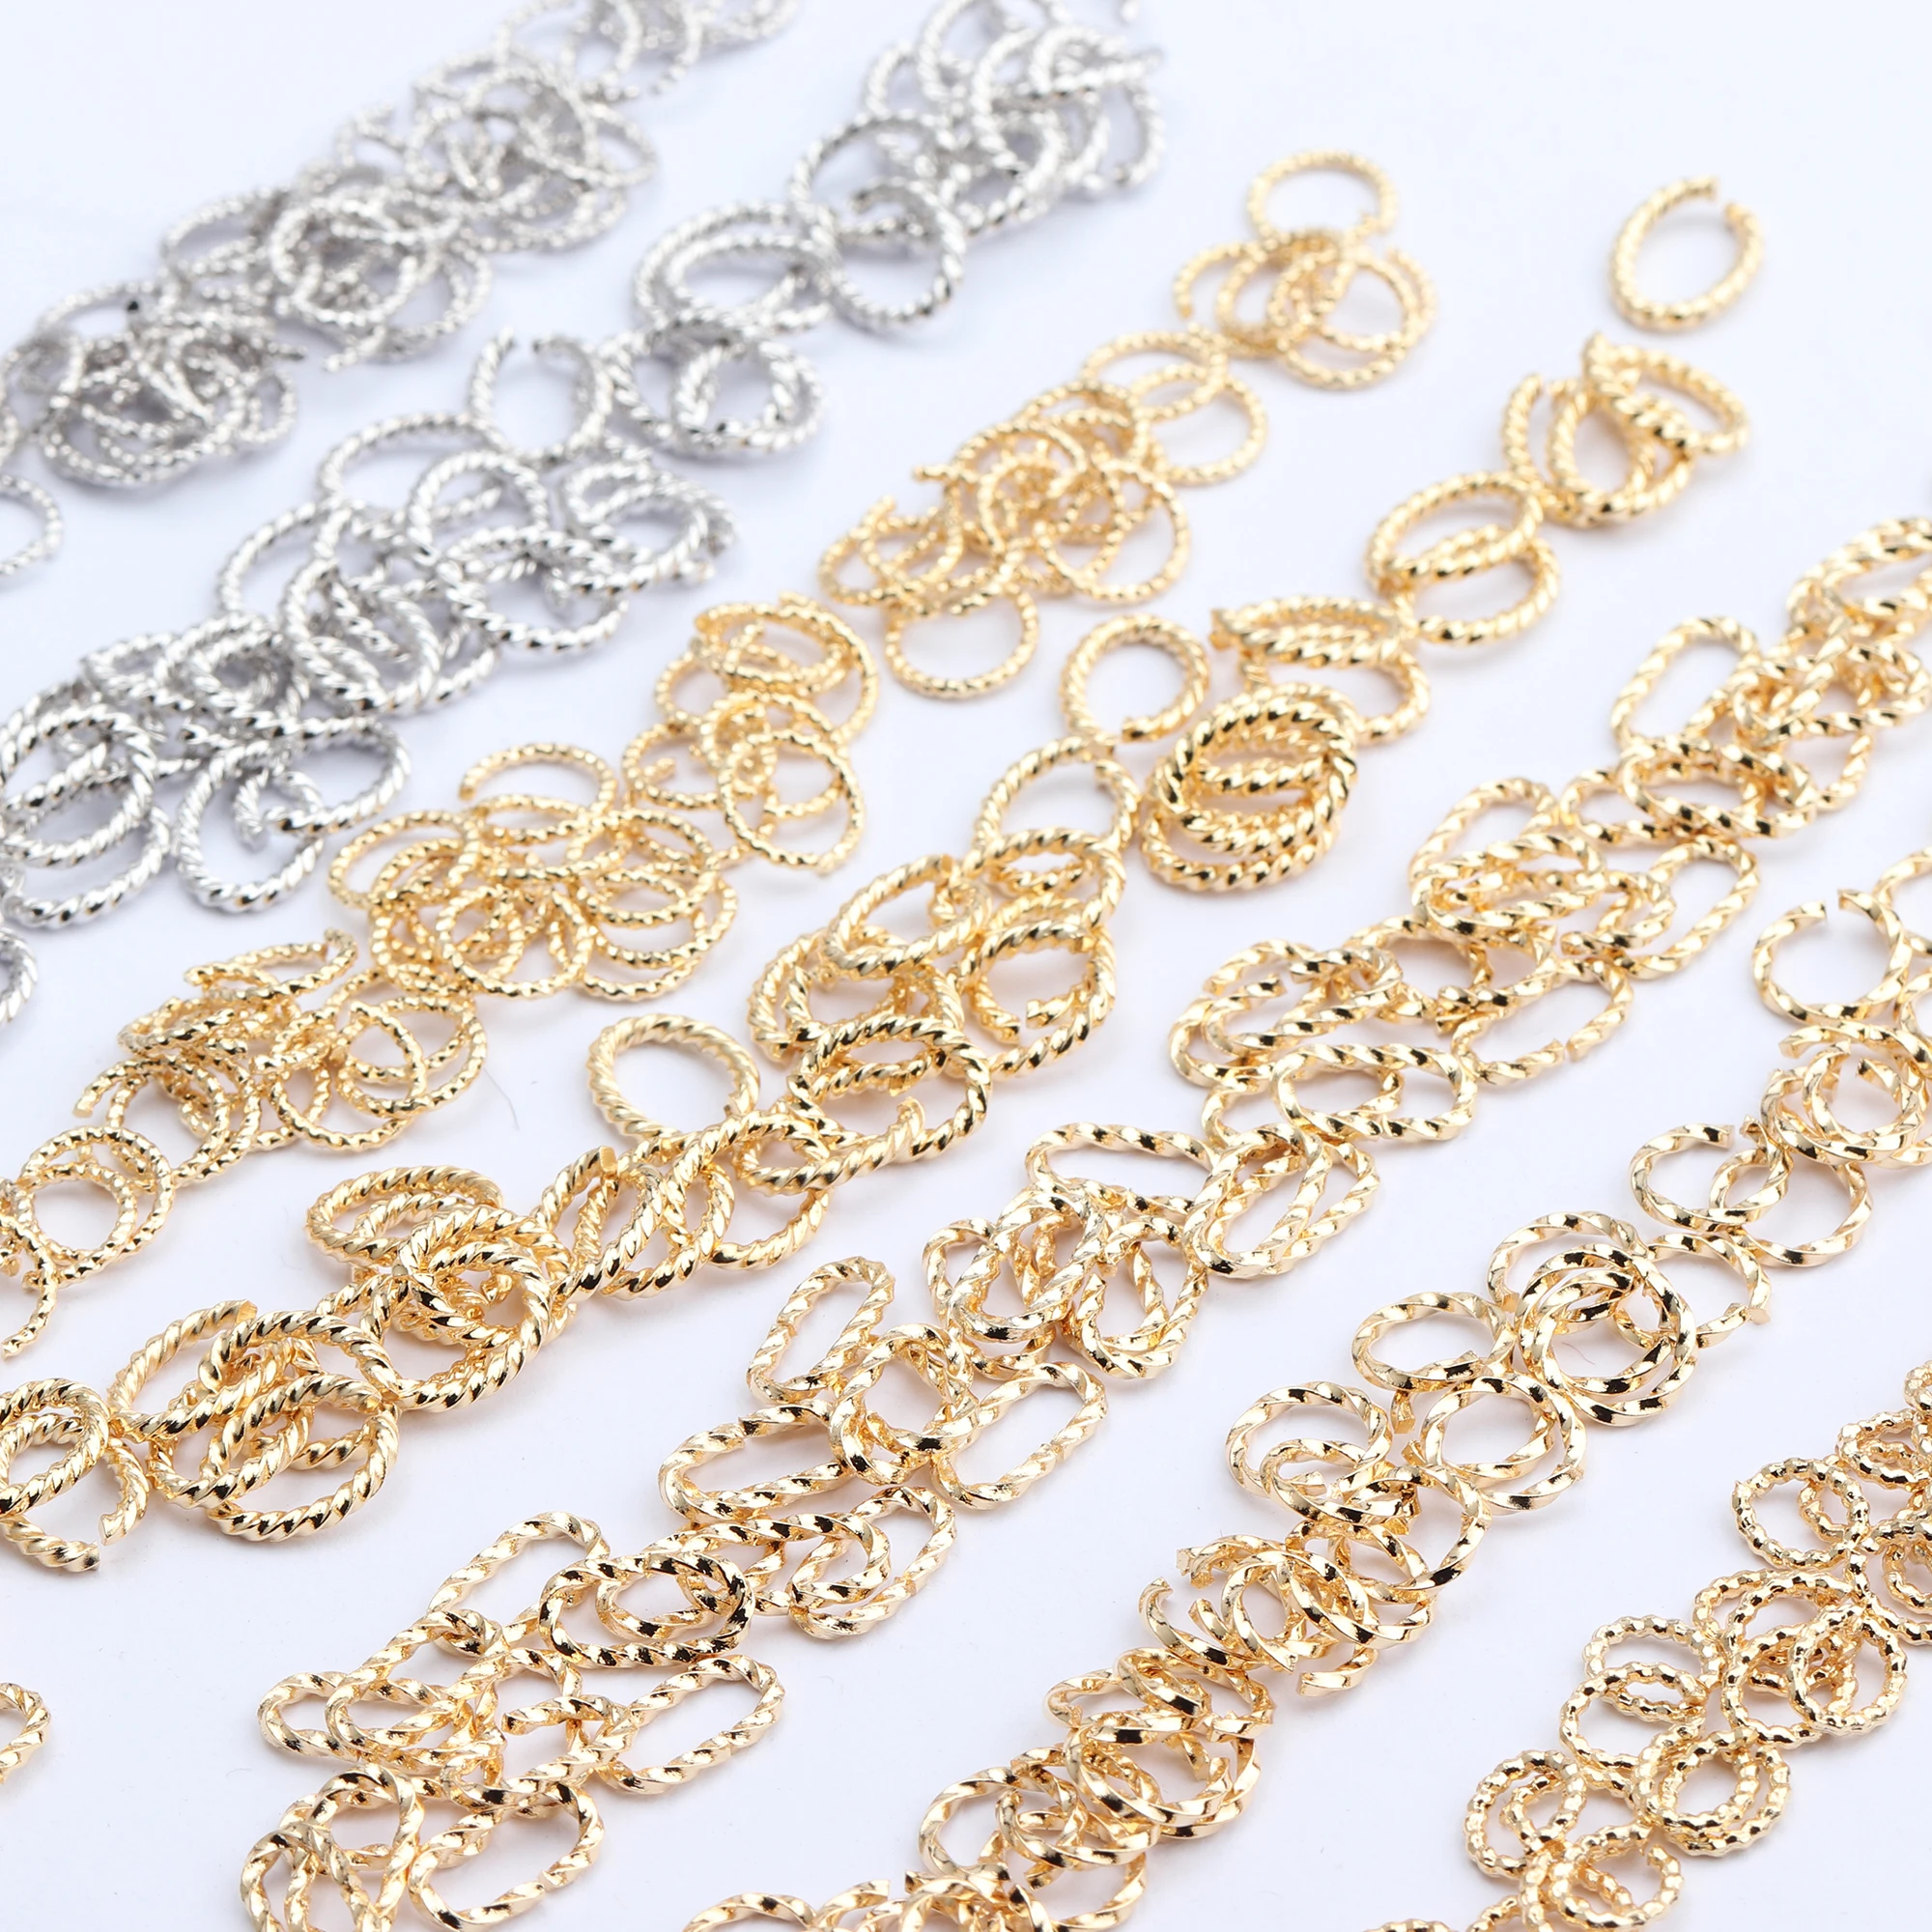 

Wholesale 18K Gold Plated Nickel Free Jump Rings Connectors Diy Jewelry Making Accessories M603 20g/lot, Gold,silver